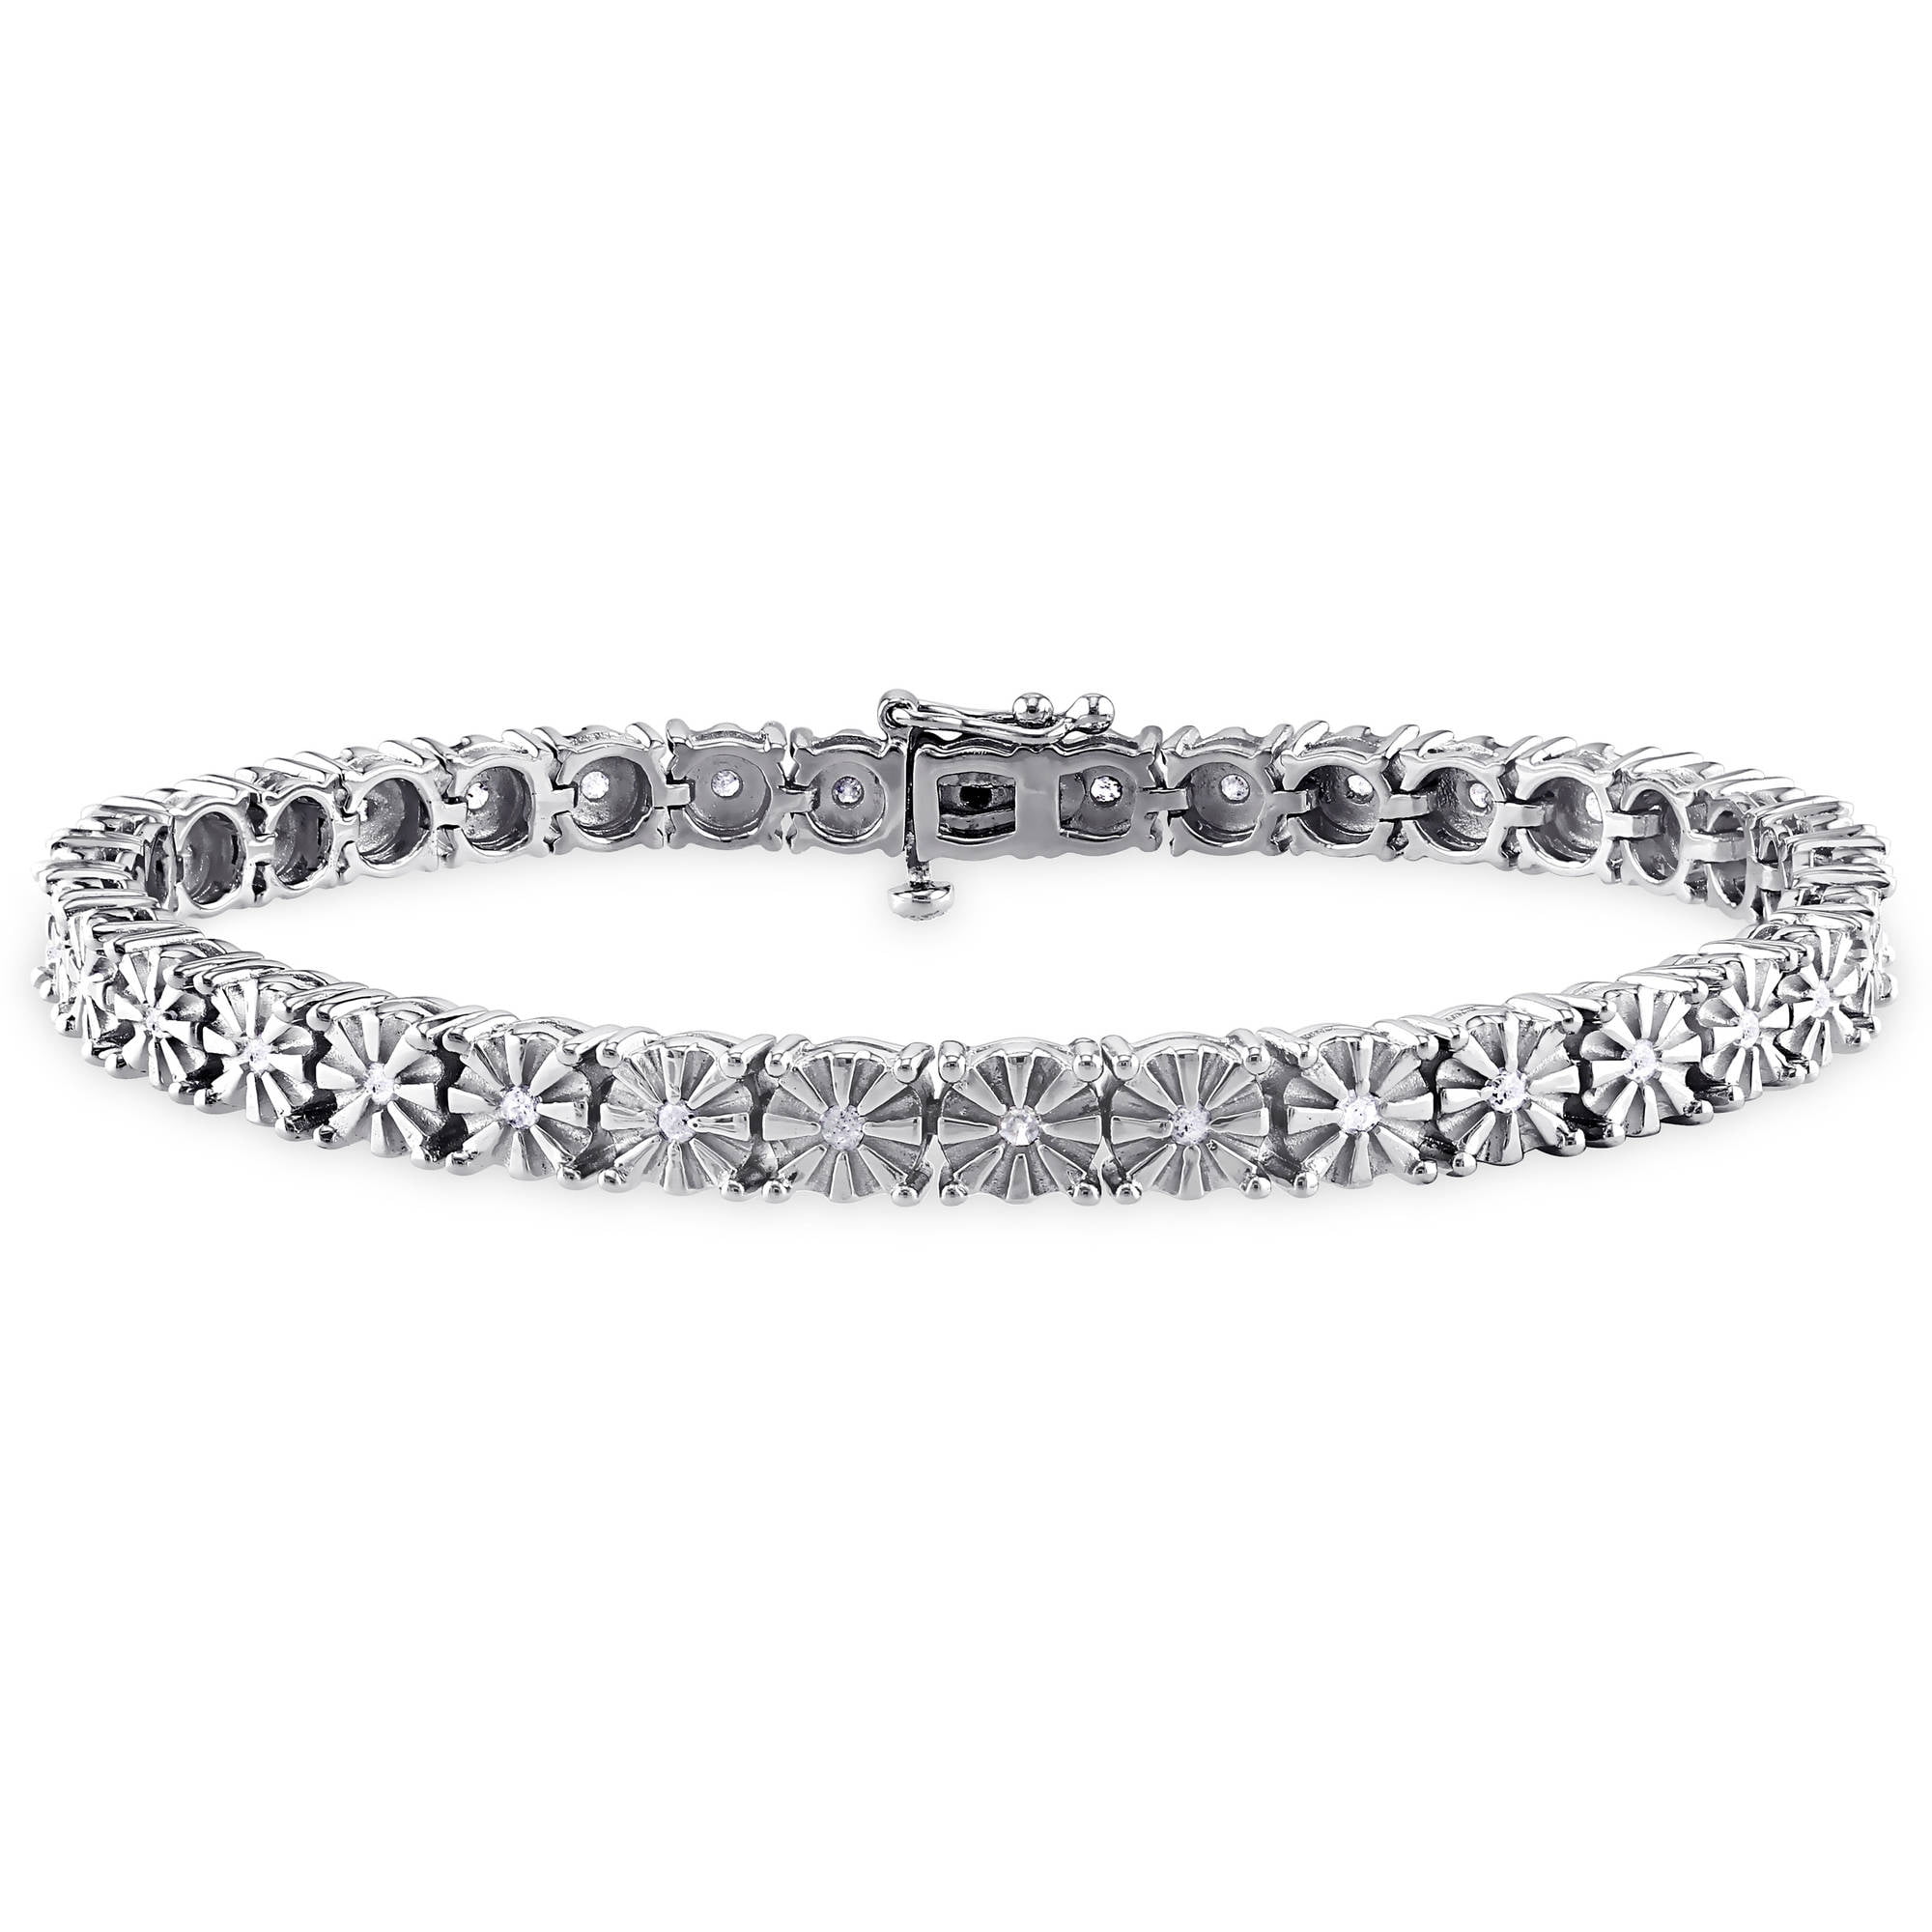 7"  Clear Brilliant Cut Round CZ Tennis Bracelet REAL 925 Sterling Silver 